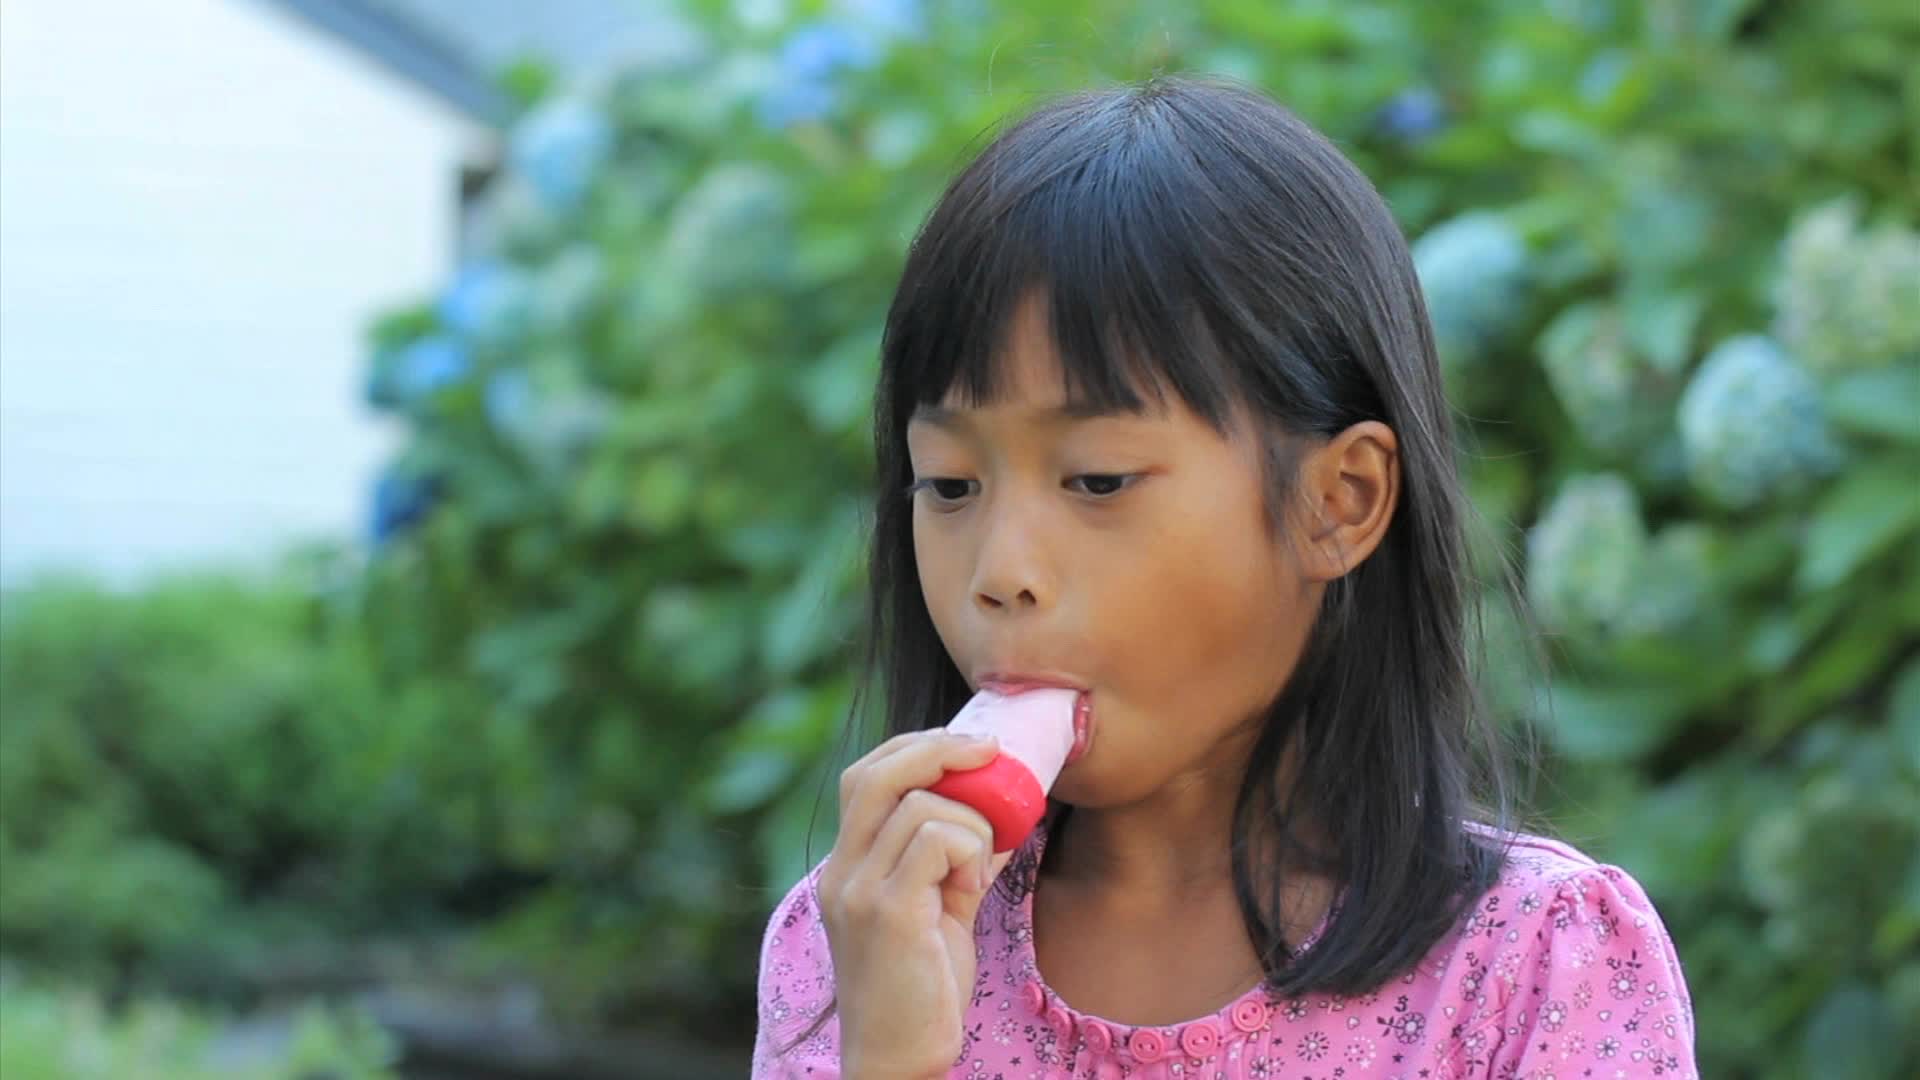 A cute little 6 year old Asian girl enjoys a delicious popsicle during the ...